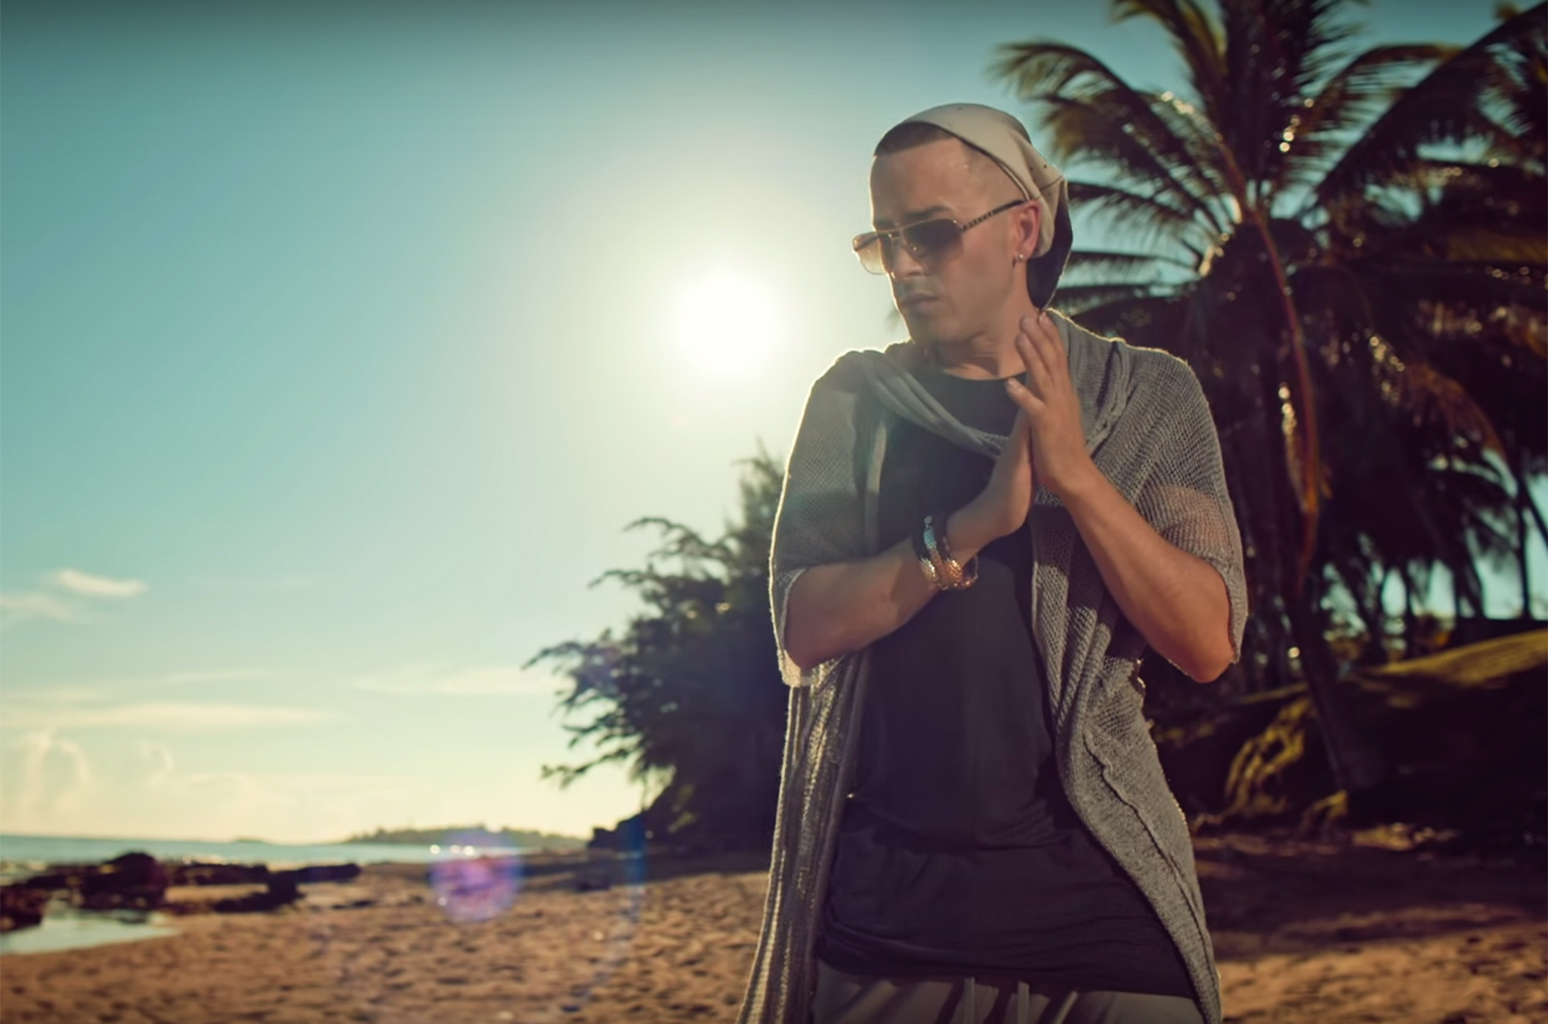 Here Are Yandel's Most-Watched Videos, From 'Encantadora' to 'Explícale'